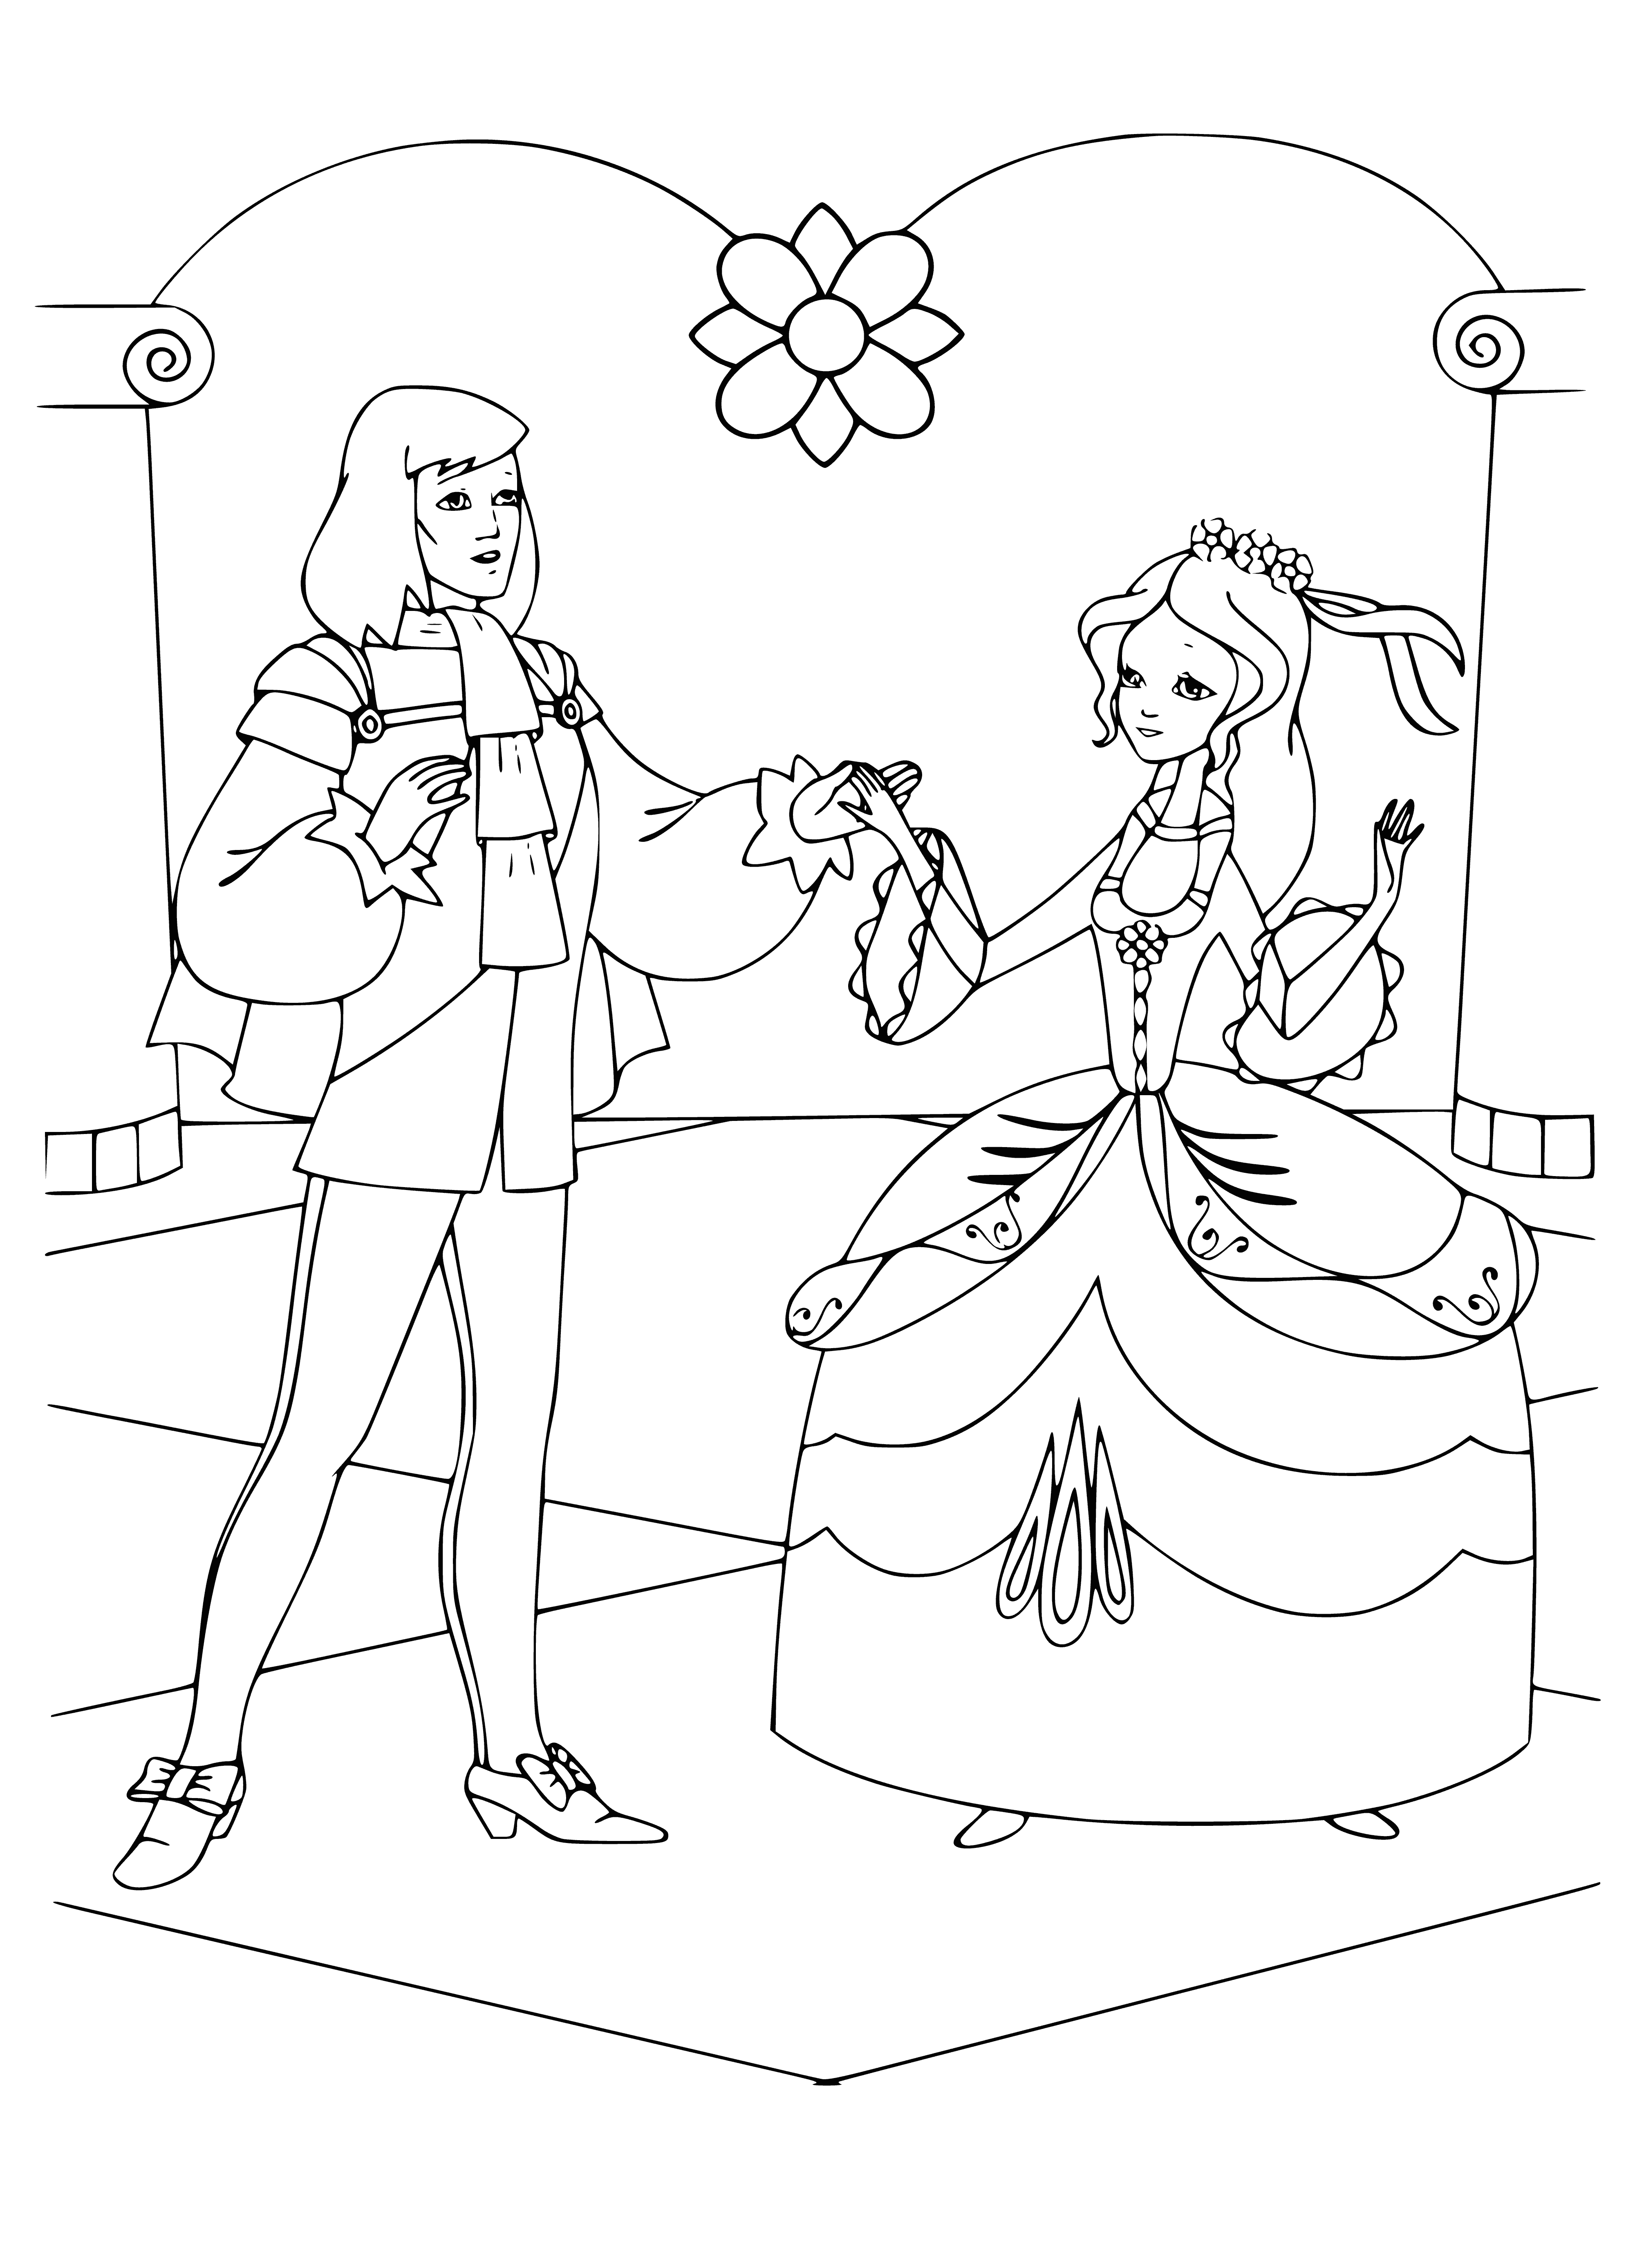 coloring page: Cinderella and Prince have a magical moment in this coloring page; she's in blue, he's in red/gold. White flowers frame them as he kneels before her. #timestamp